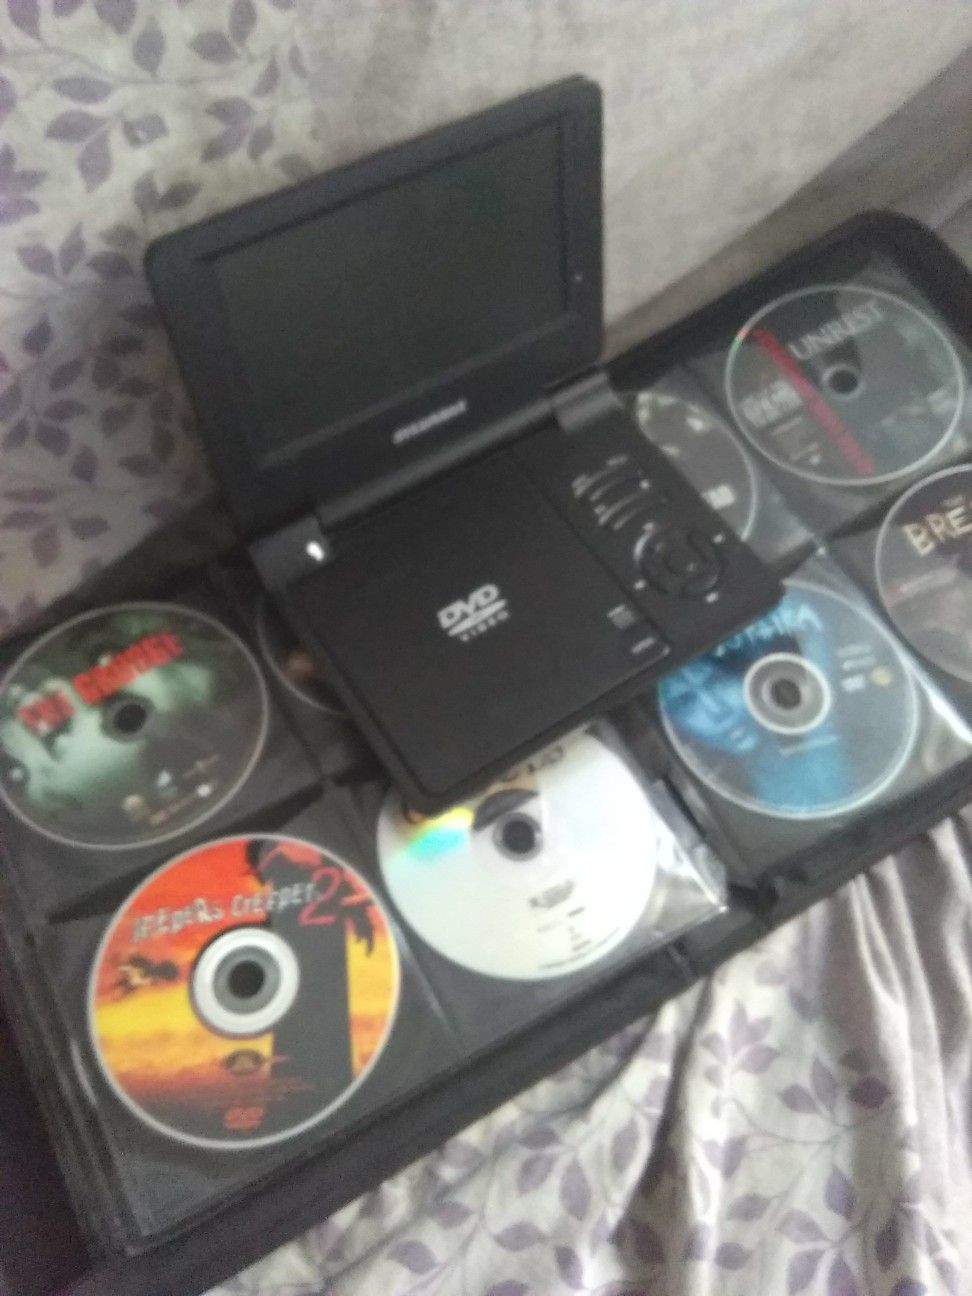 DVD player with movies